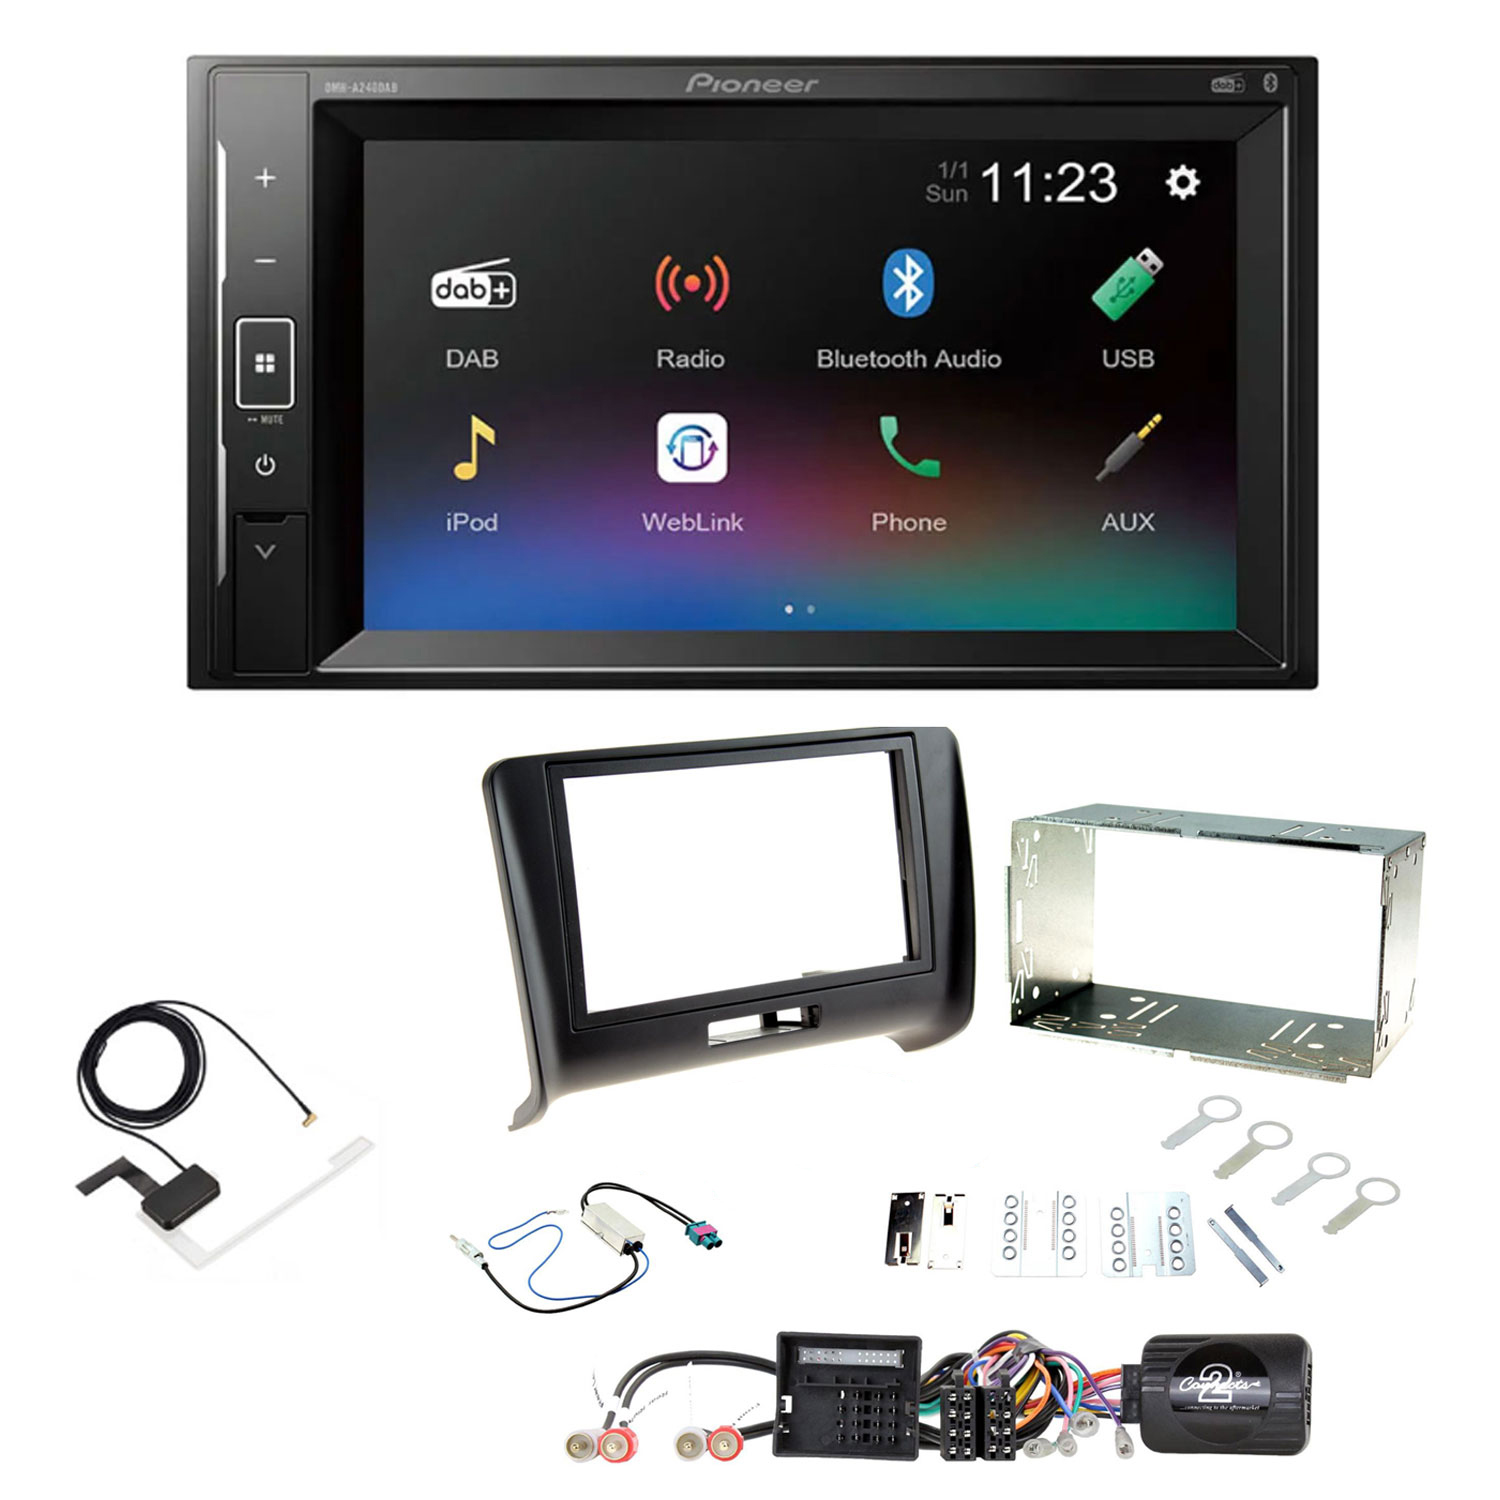 Audi TT Pioneer Double Din with DAB, 6.2" Screen Bluetooth Stereo Upgrade Kit